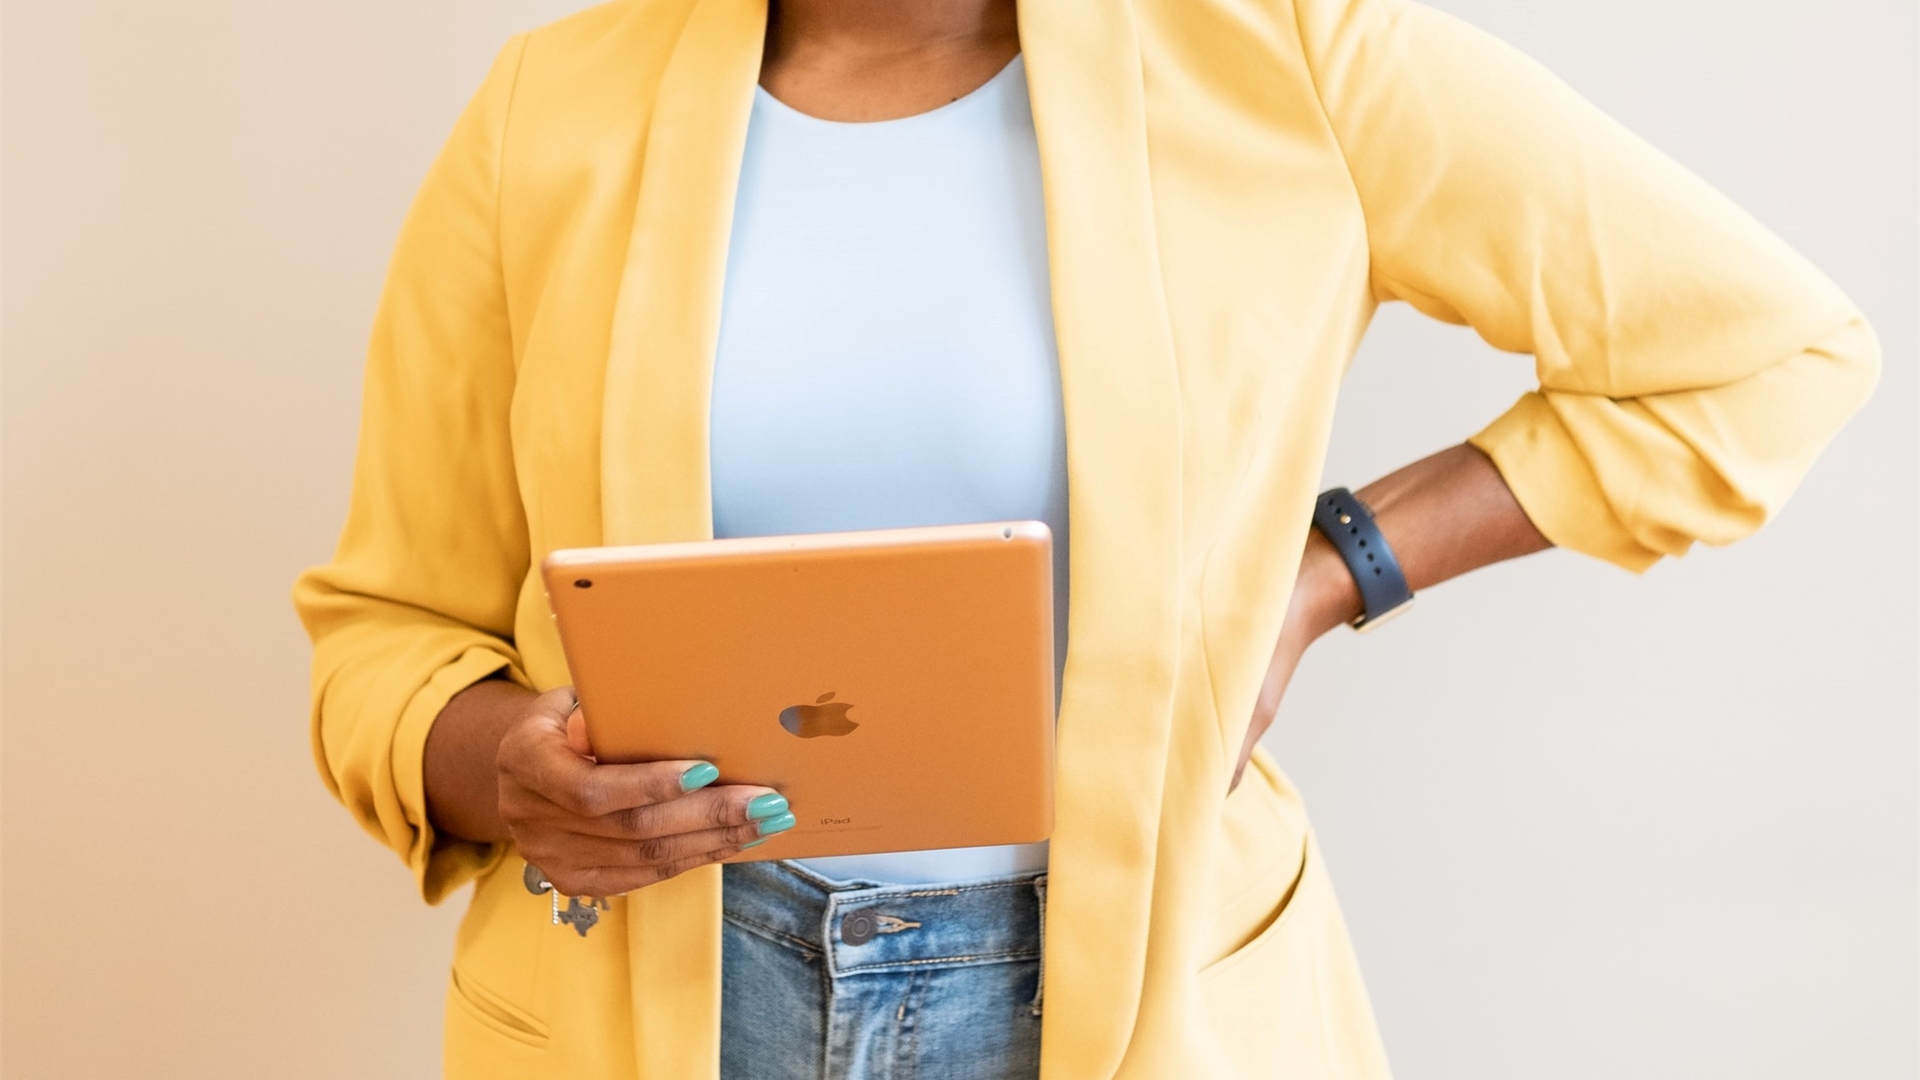 A person holding an iPad wearing a yellow jacket